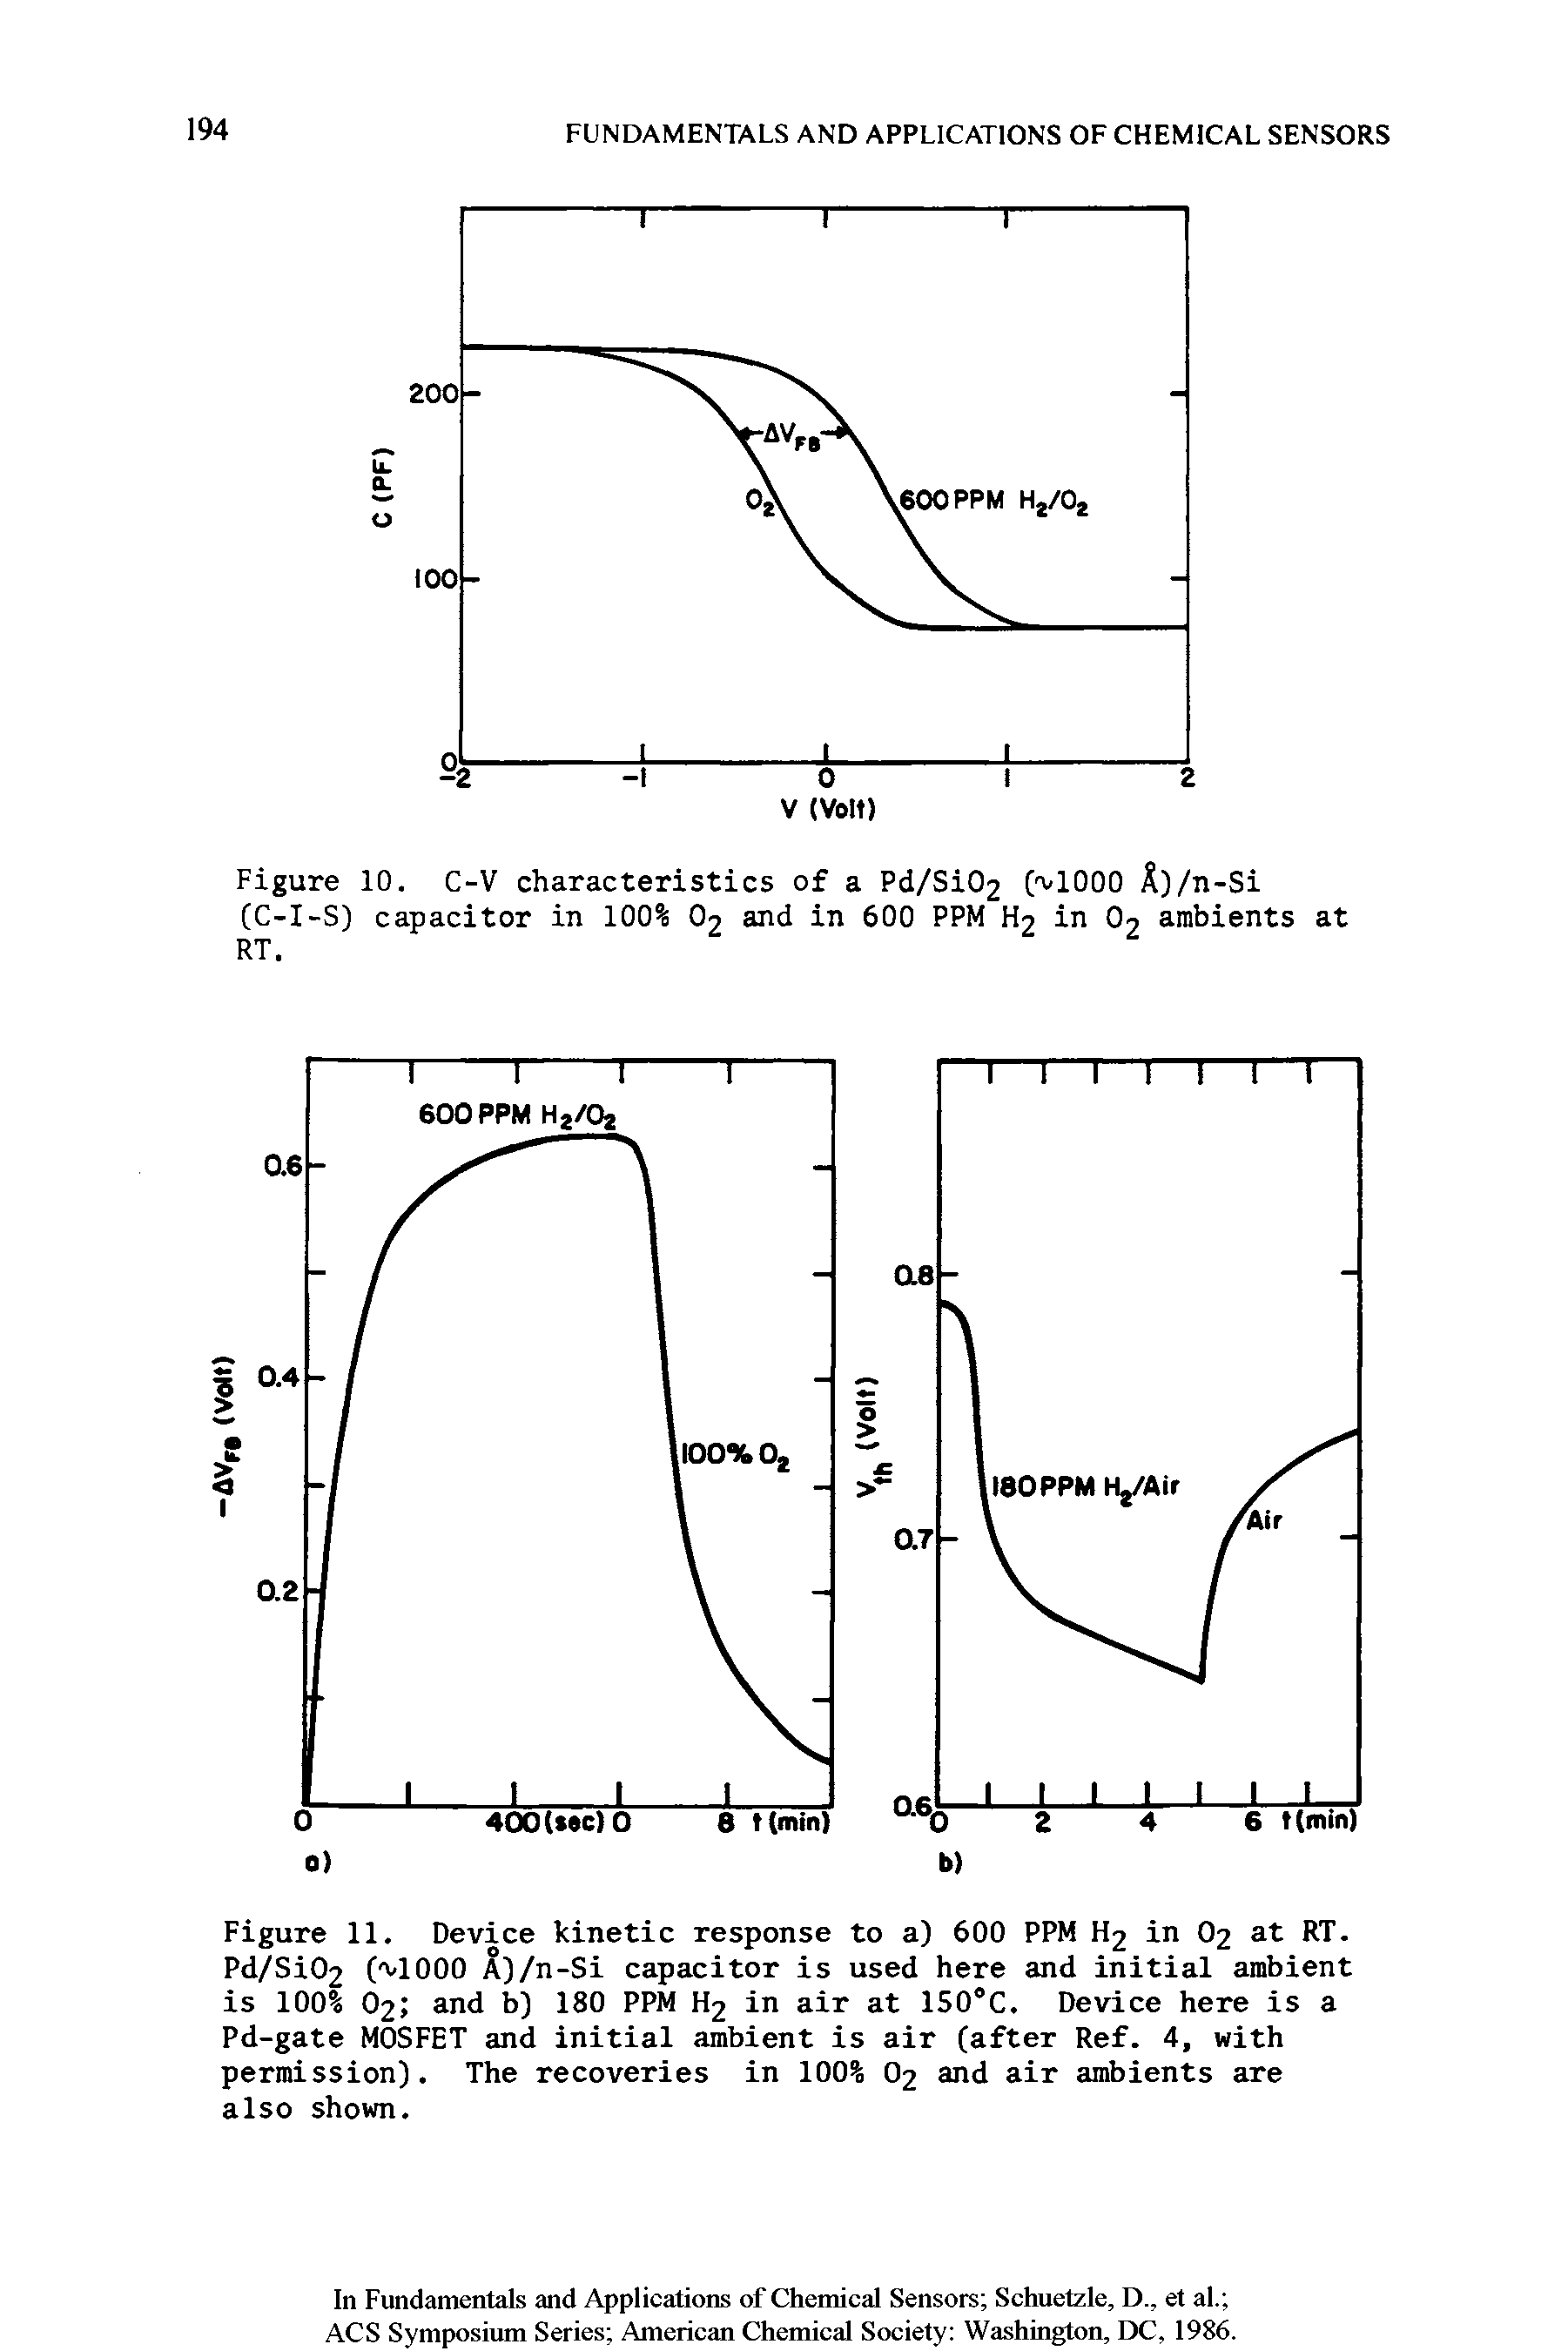 Figure 11. Device kinetic response to a) 600 PPM H2 in O2 at RT. Pd/Si02 O1000 A)/n-Si capacitor is used here and initial ambient is 100% O2 and b) 180 PPM H2 in air at 150°C. Device here is a Pd-gate MOSFET and initial ambient is air (after Ref. 4, with permission). The recoveries in 100% O2 and air ambients are also shown.